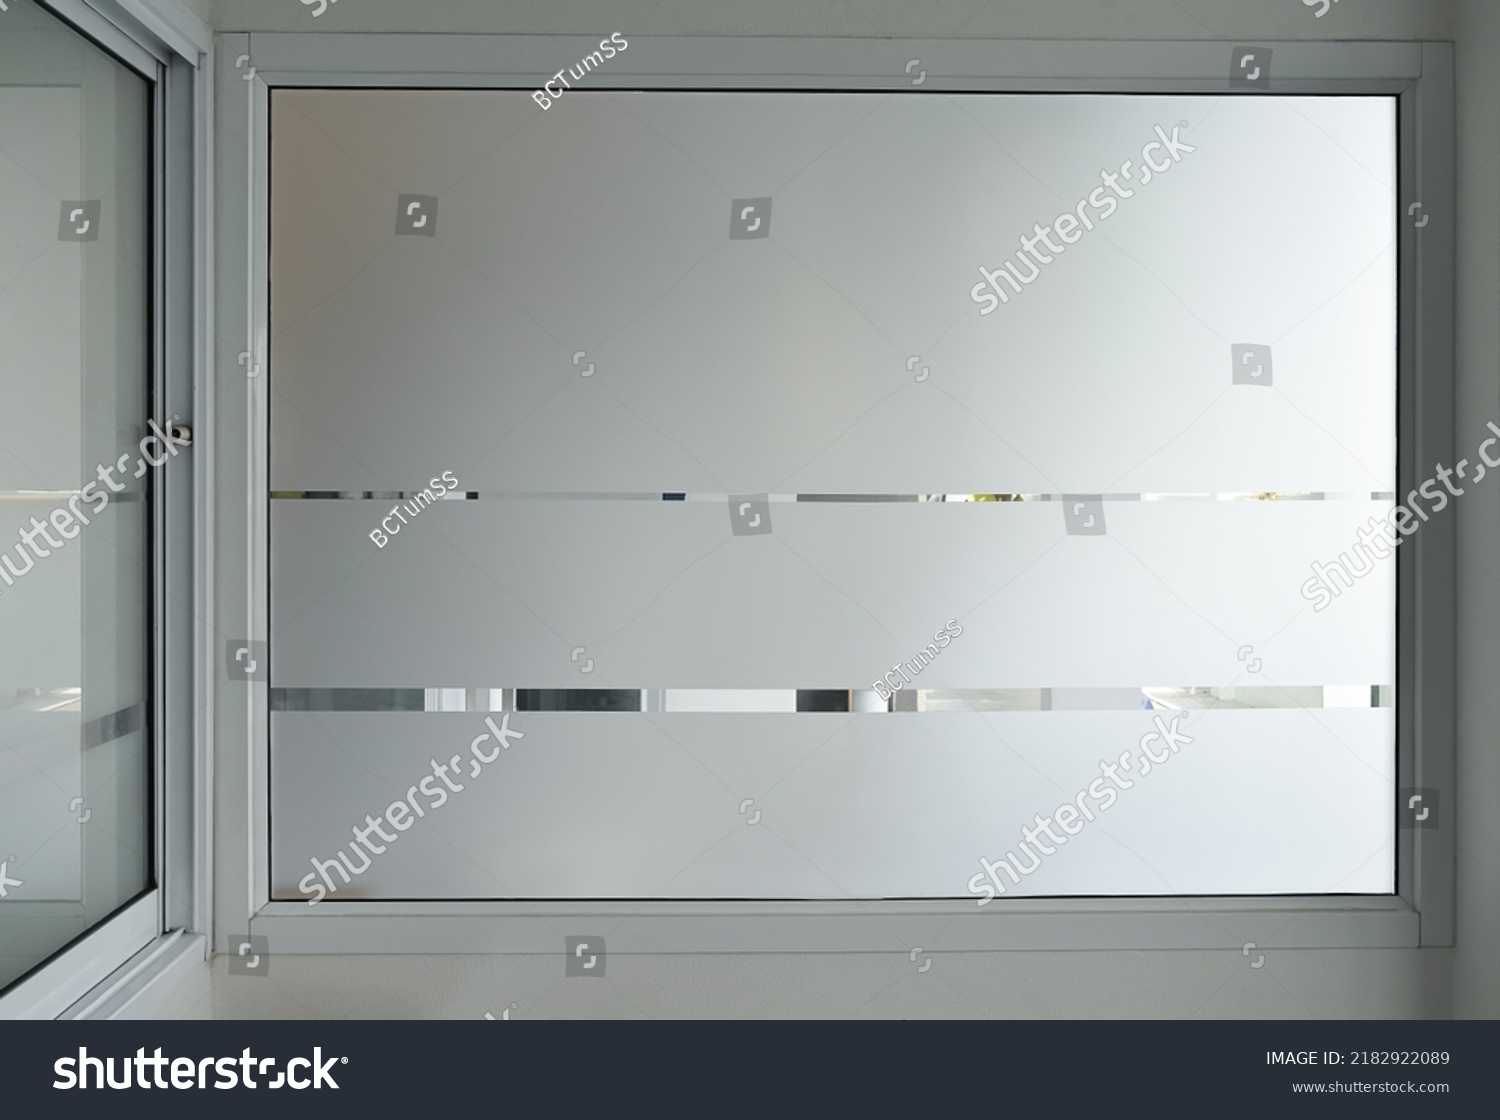 Aluminium sliding window of office. office sliding glass window. Decorative Glass Film on door of office. Closeup Frosted Glass Thick Film for reduced visibility across. #2182922089